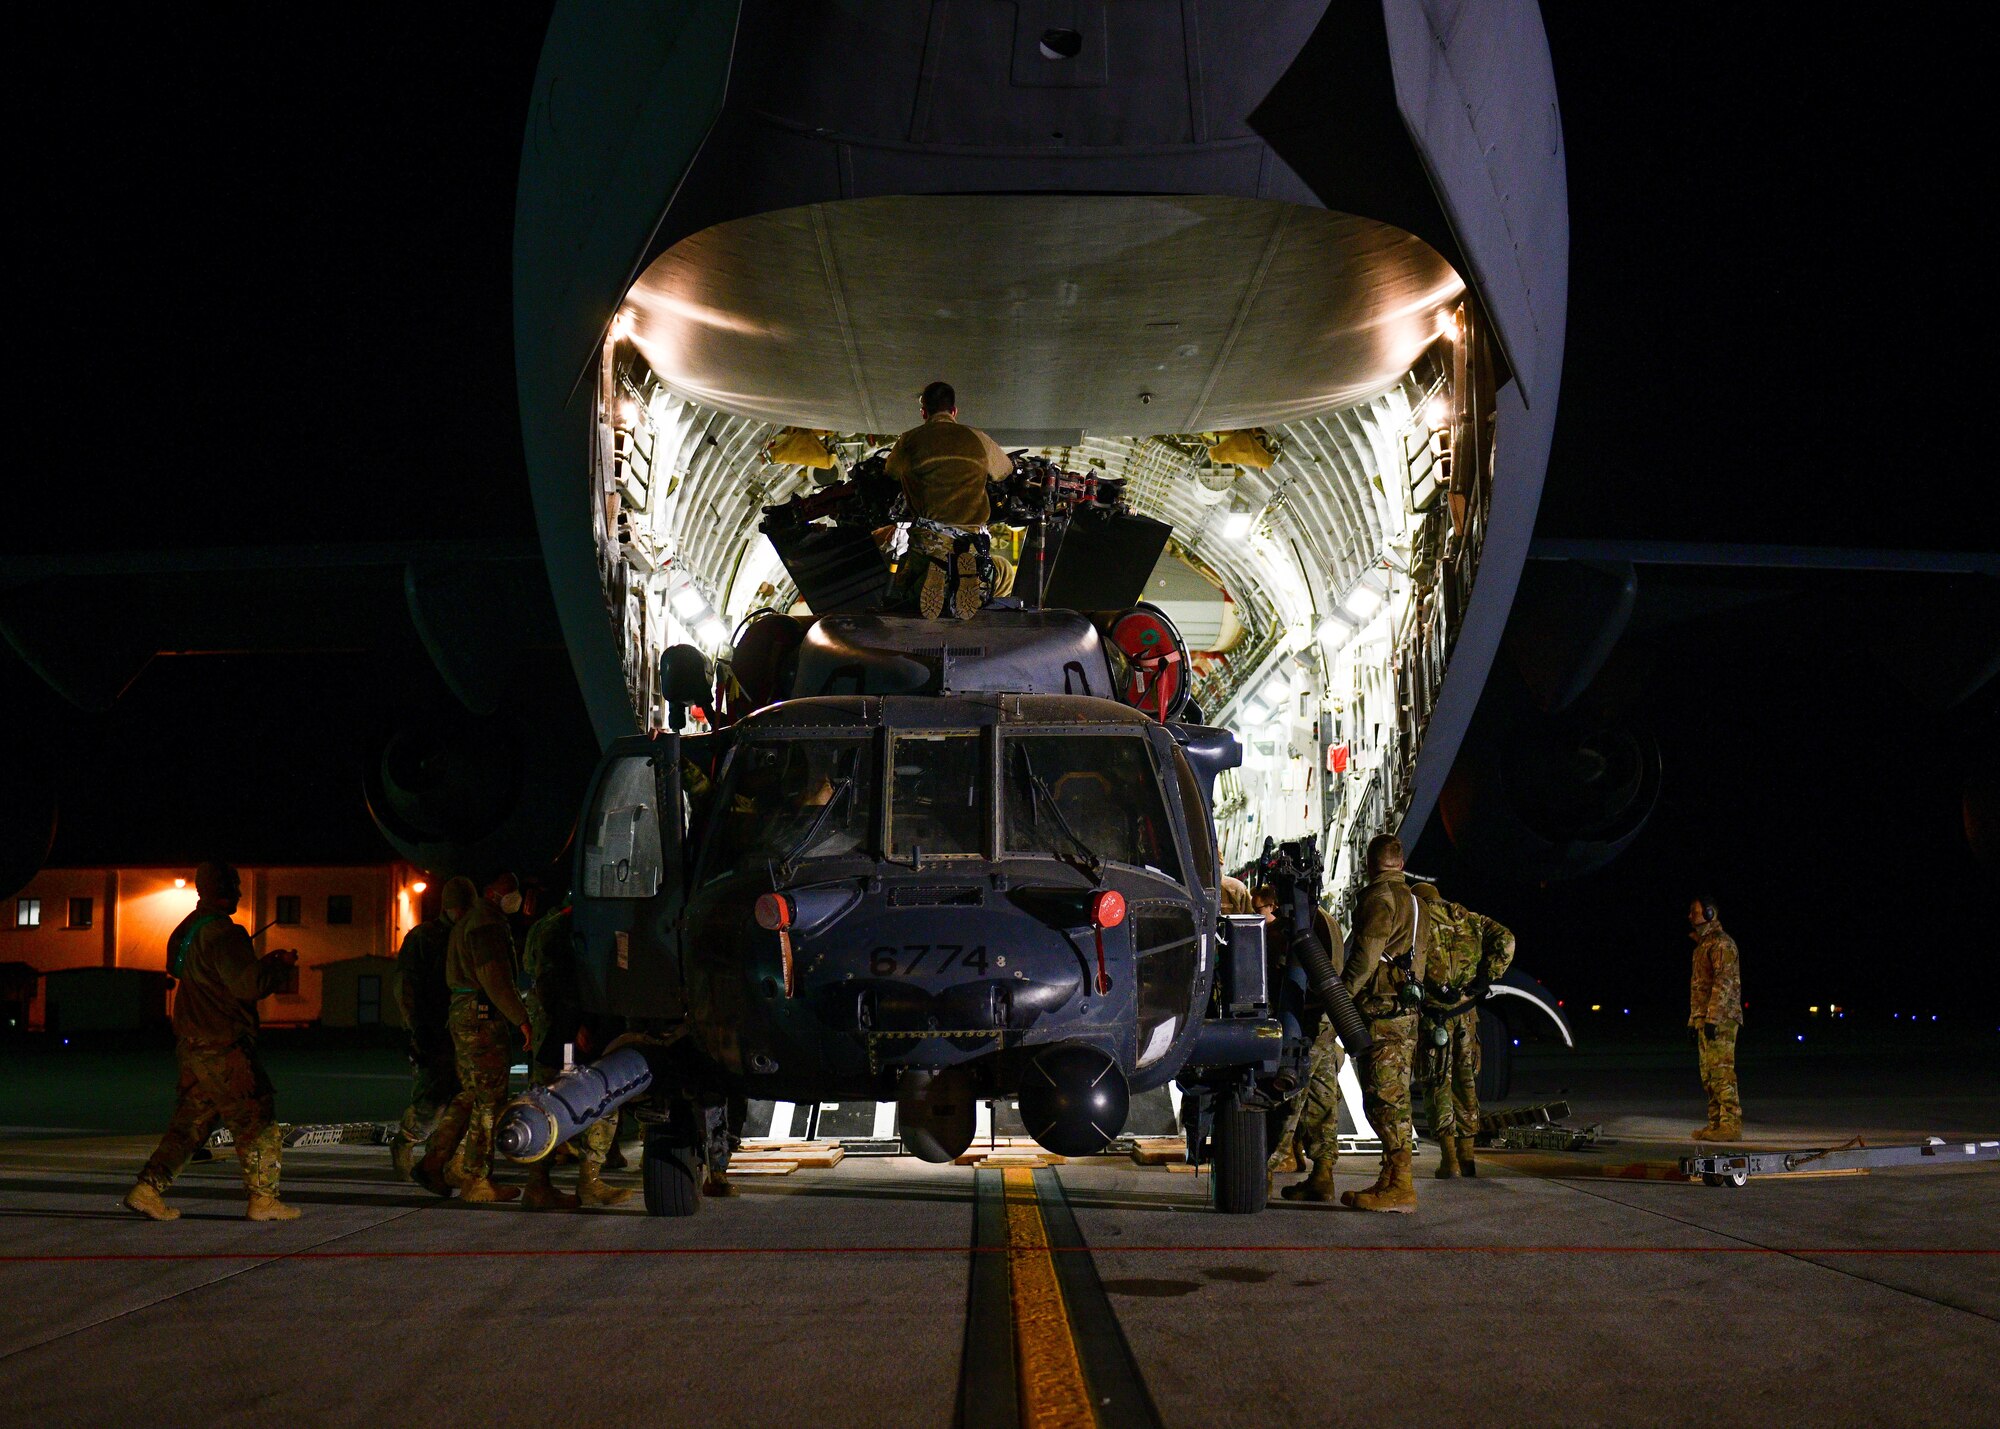 U.S. Airmen assigned to the 724th Air Mobility Squadron unload an HH-60G Pave Hawk from a C-17 Globemaster at Aviano Air Base, Italy, Feb. 9, 2022. The HH-60G was deployed and supported operations with the 56th RQS. The 56th RQS offers long-range rescue, humanitarian assistance, non-combatant evacuation and disaster relief capabilities for USEUCOM, USAFRICOM and NATO in peacetime, contingency and wartime operations. (U.S. Air Force photo by Senior Airman Brooke Moeder)